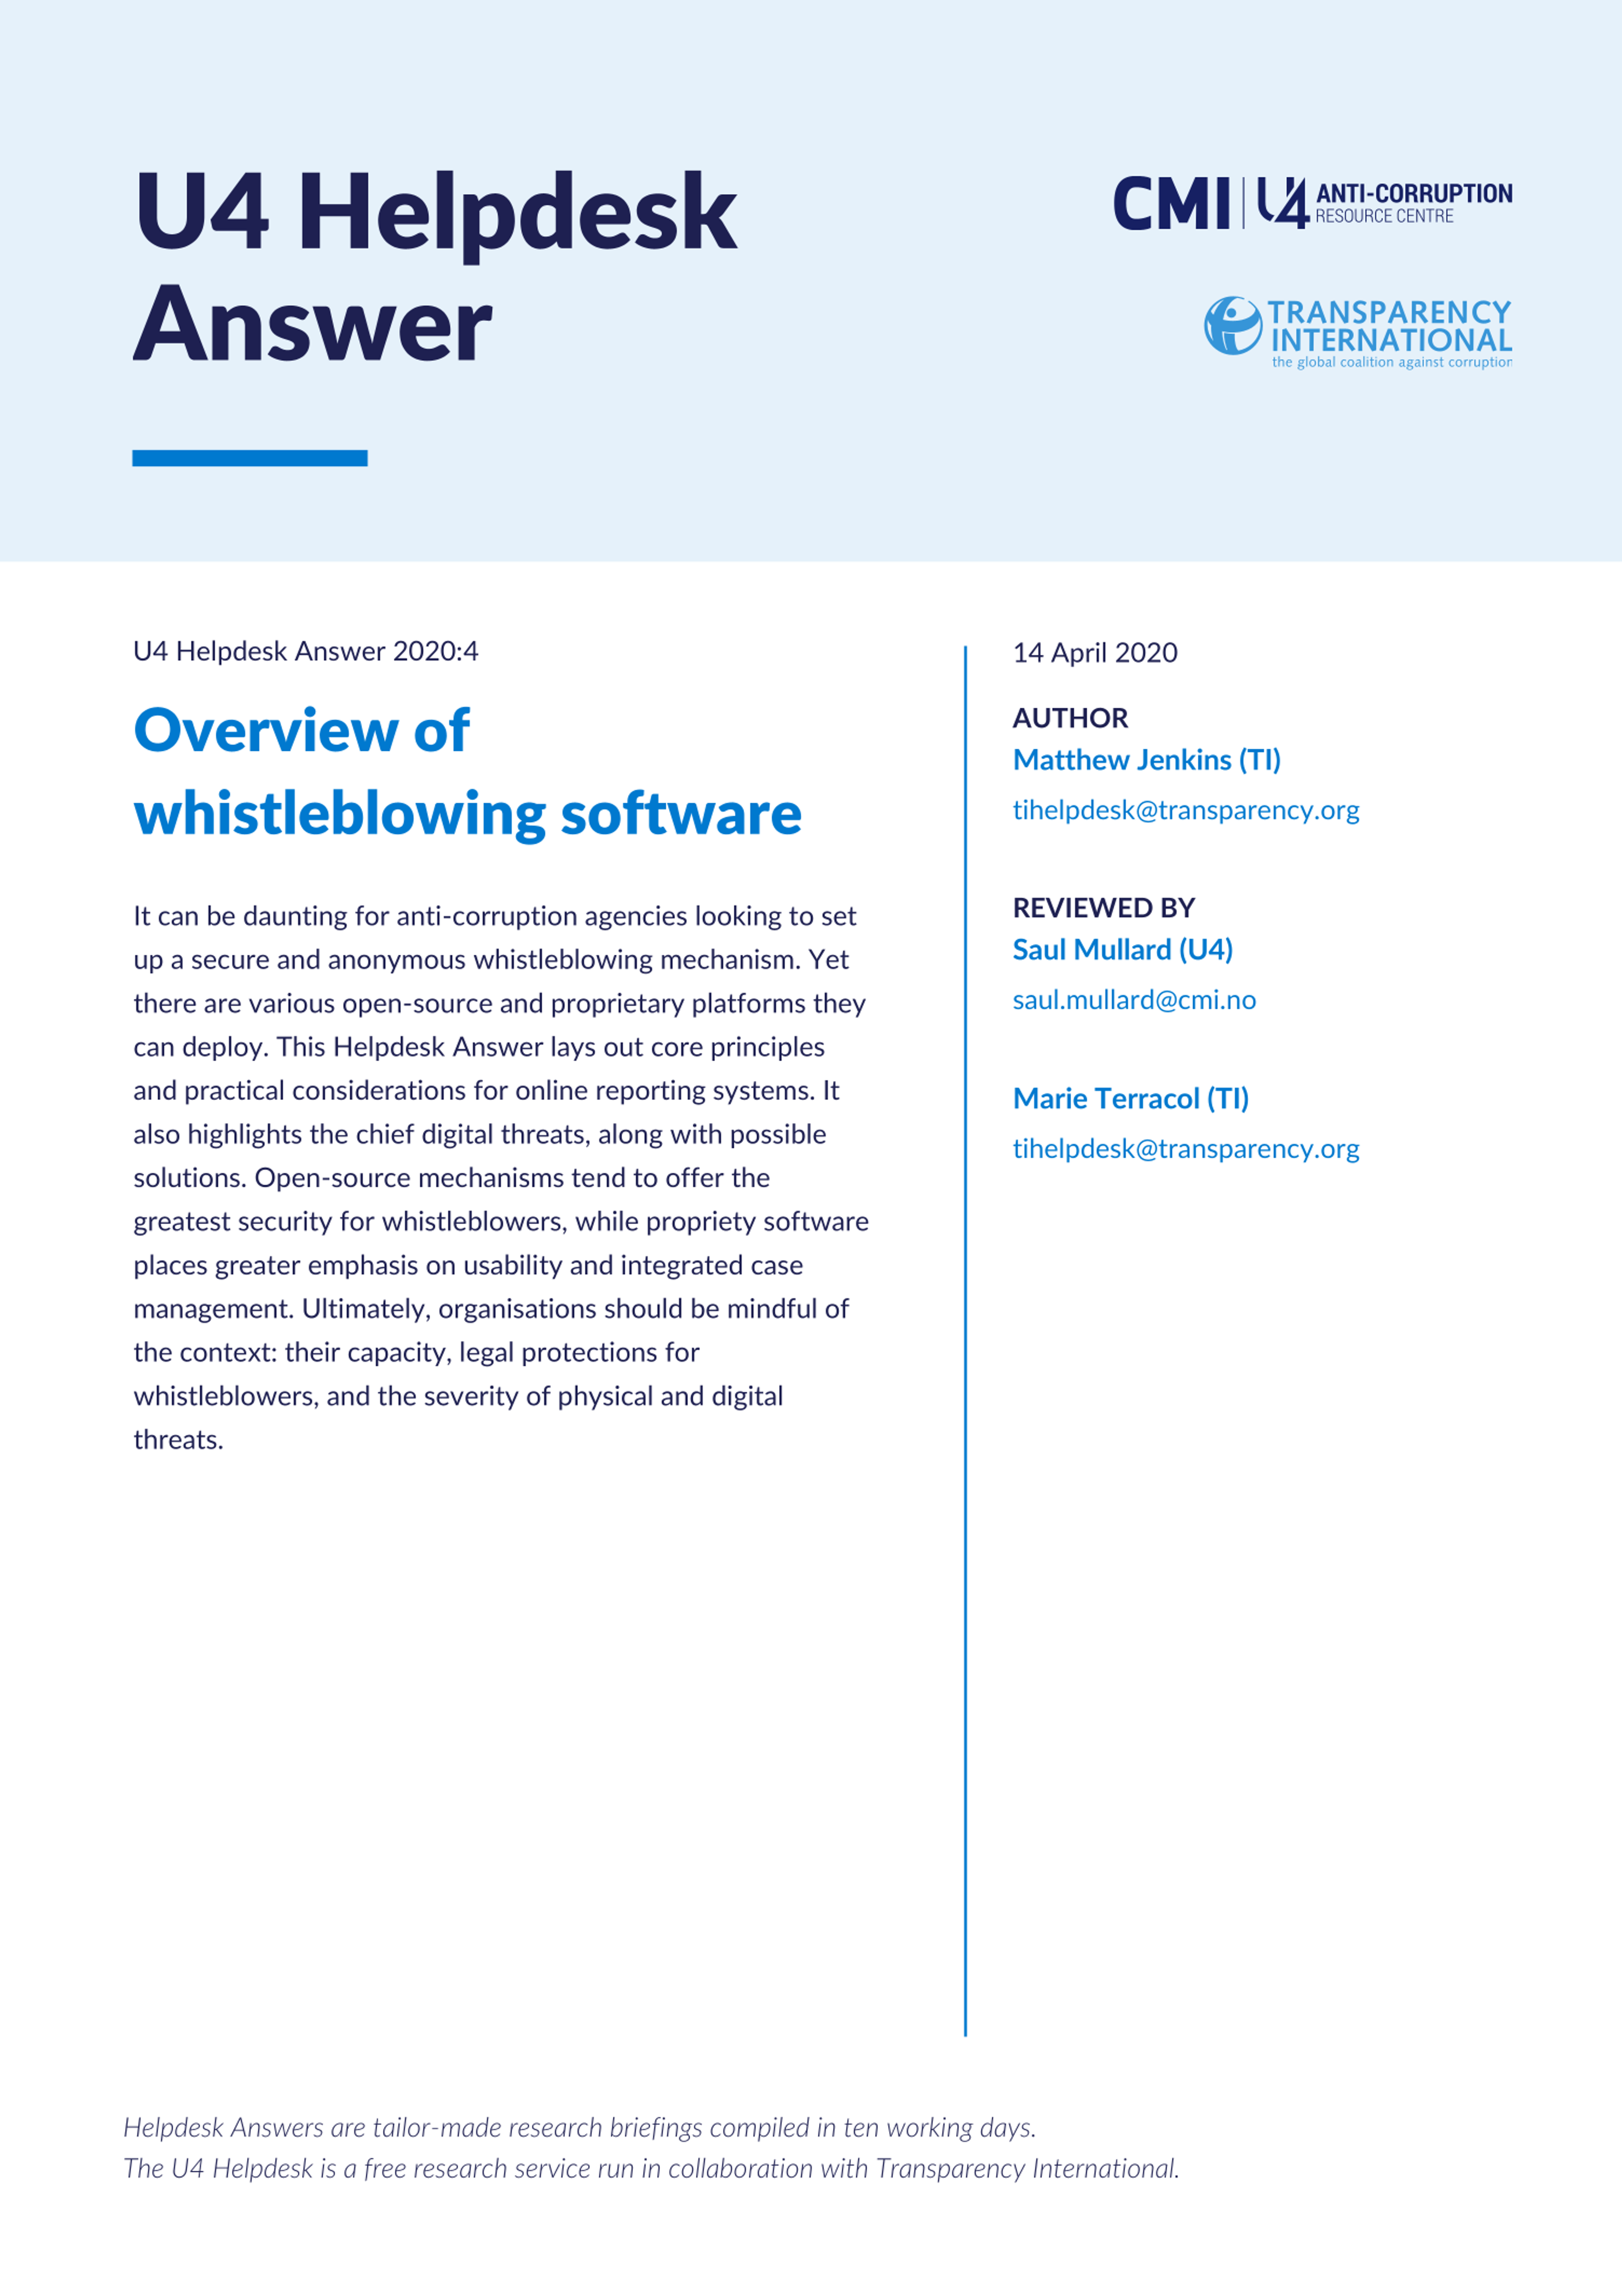 Overview of whistleblowing software